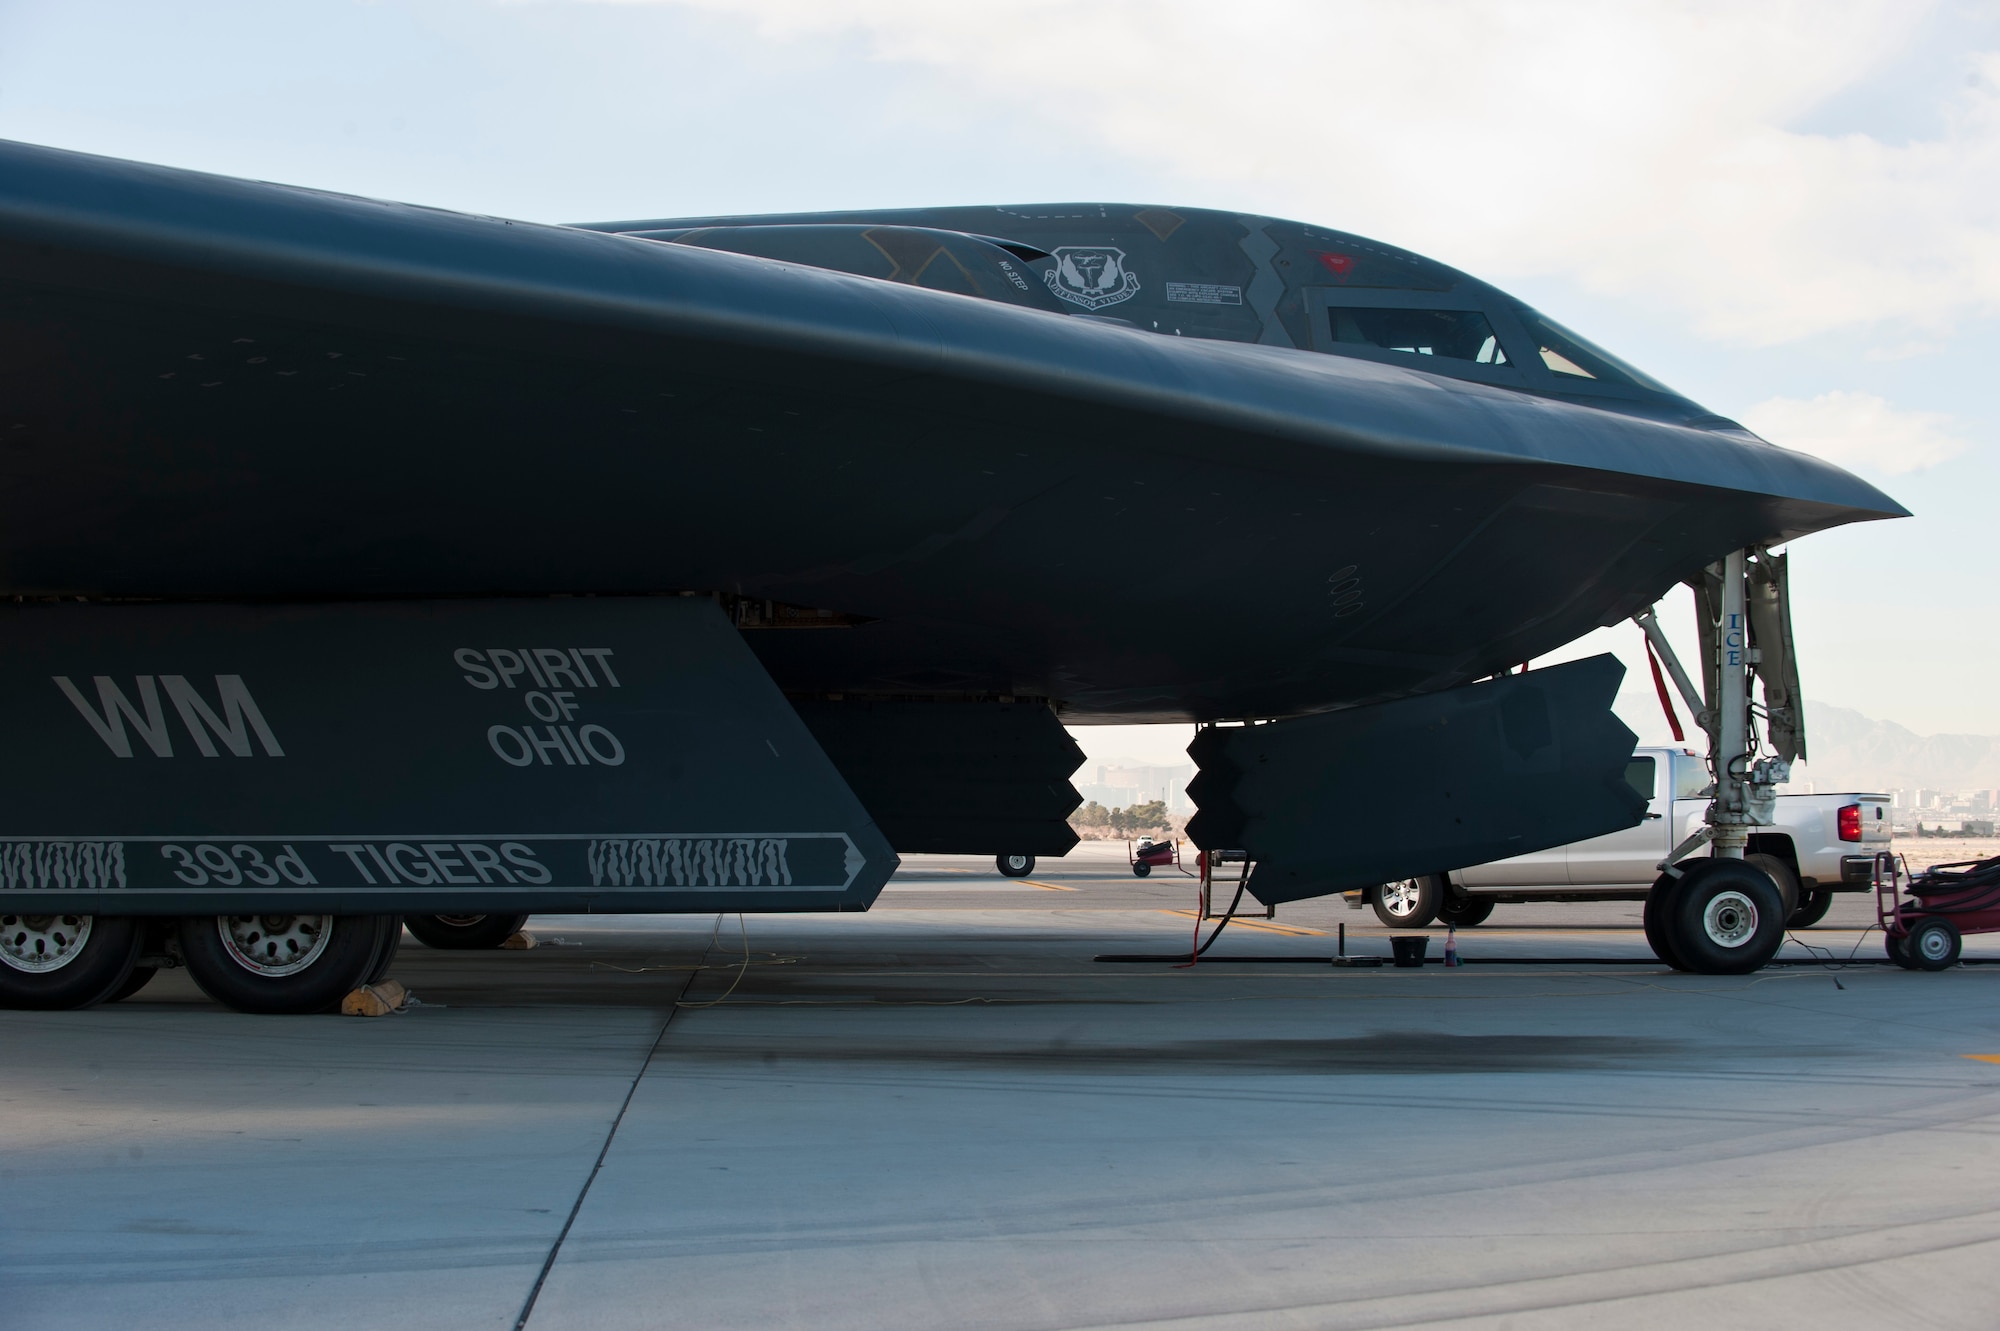 A U.S. Air Force B-2 Spirit from Whiteman Air Force Base, Mo., sits on the flightline during Red Flag 14-1 Feb. 10, 2014, at Nellis AFB, Nev. The B-2 is a low-observable aircraft capable of infiltrating enemy air space and destroying high value ground targets all while avoiding enemy air defenses. Red Flag encompasses all aspects of aerial warfare including air-to-air, air-to-ground, and electronic warfare. (U.S. Air Force photo by Airman 1st Class Thomas Spangler)